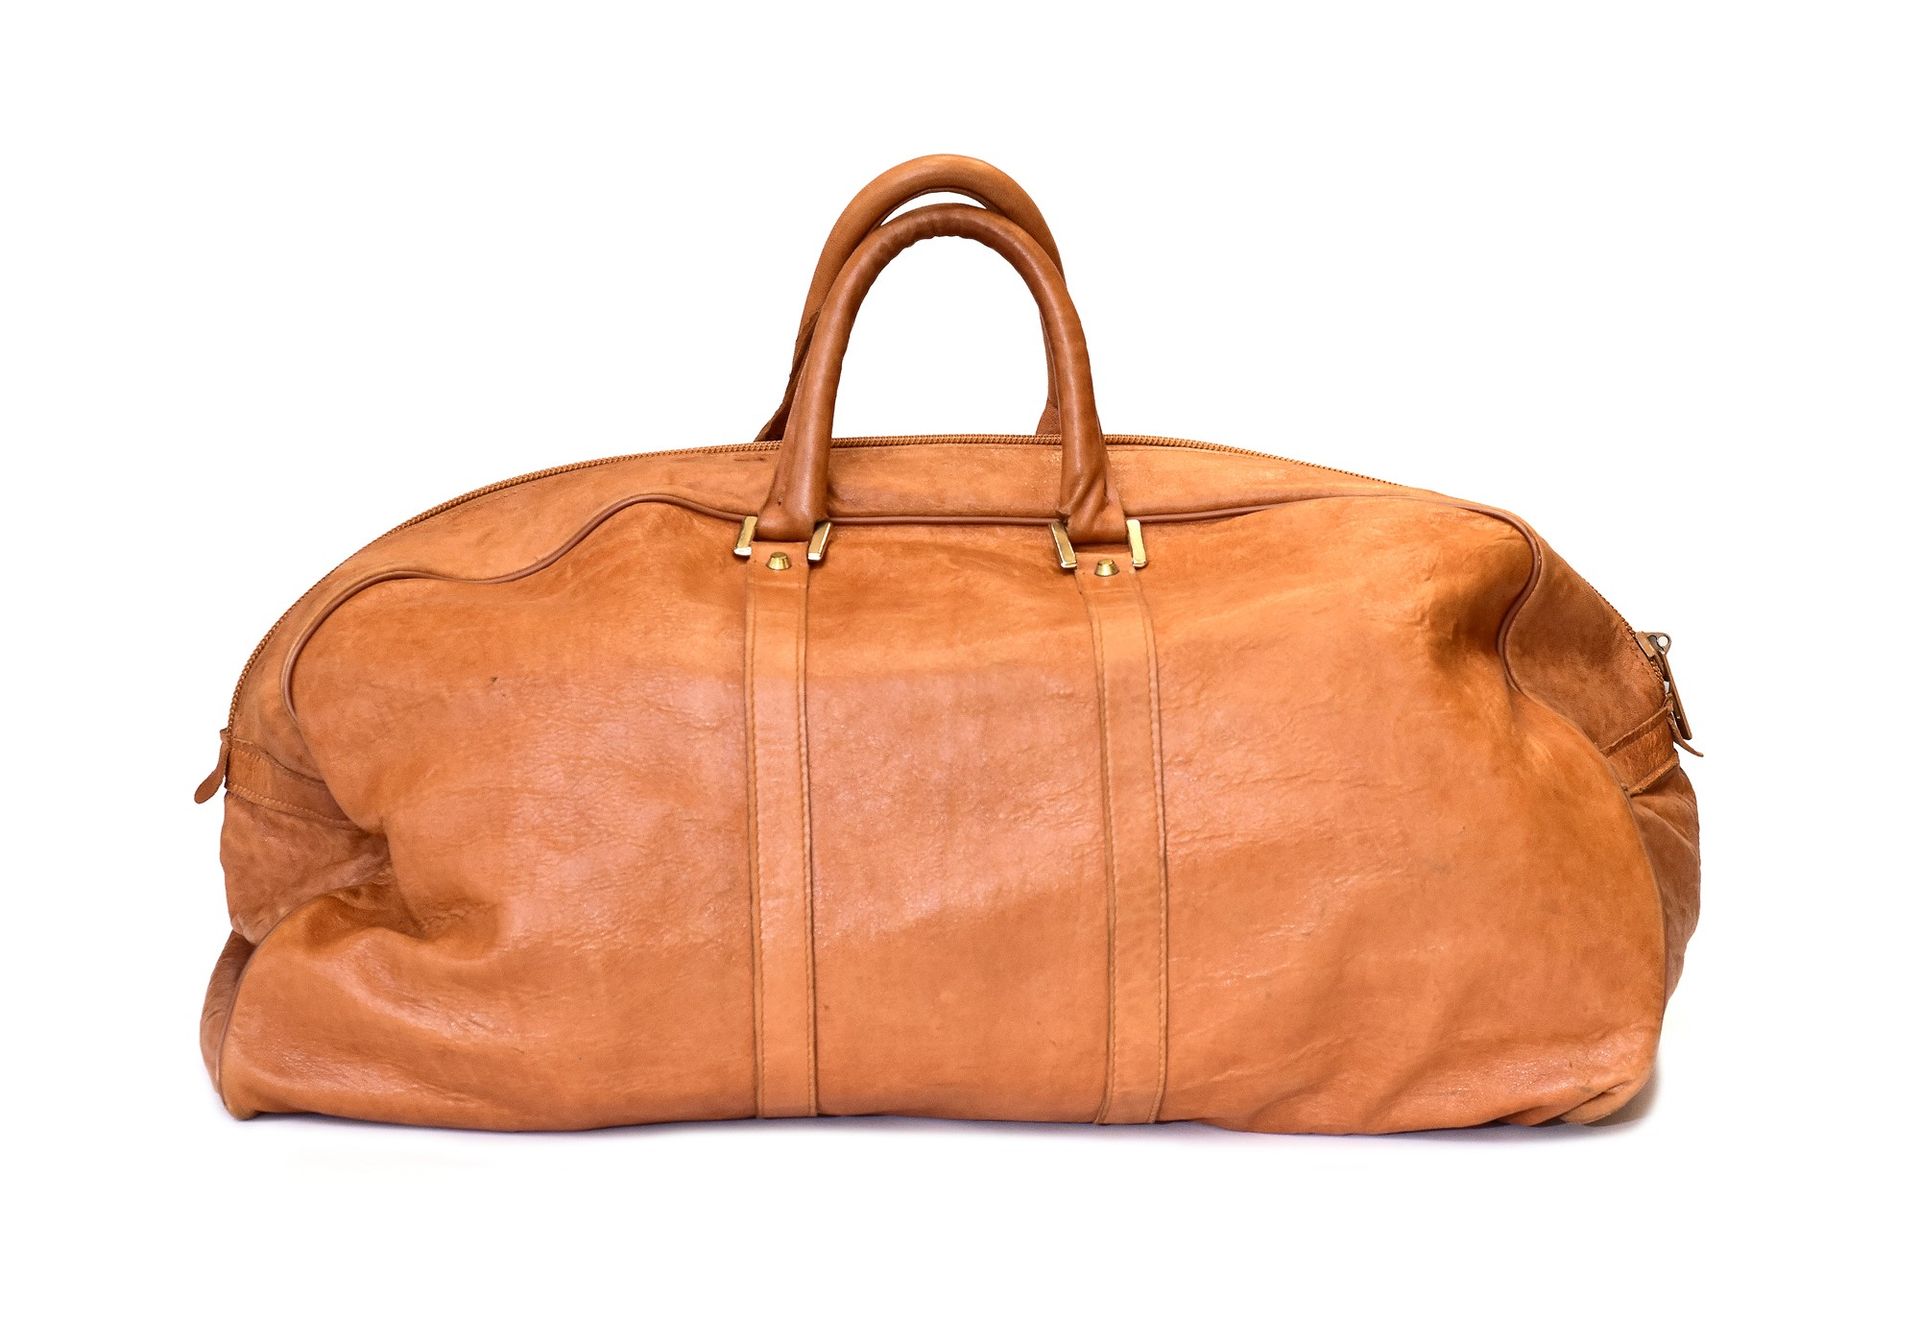 Null Leather duffel bag with rounded handles, gold hardware and zipper closure. &hellip;